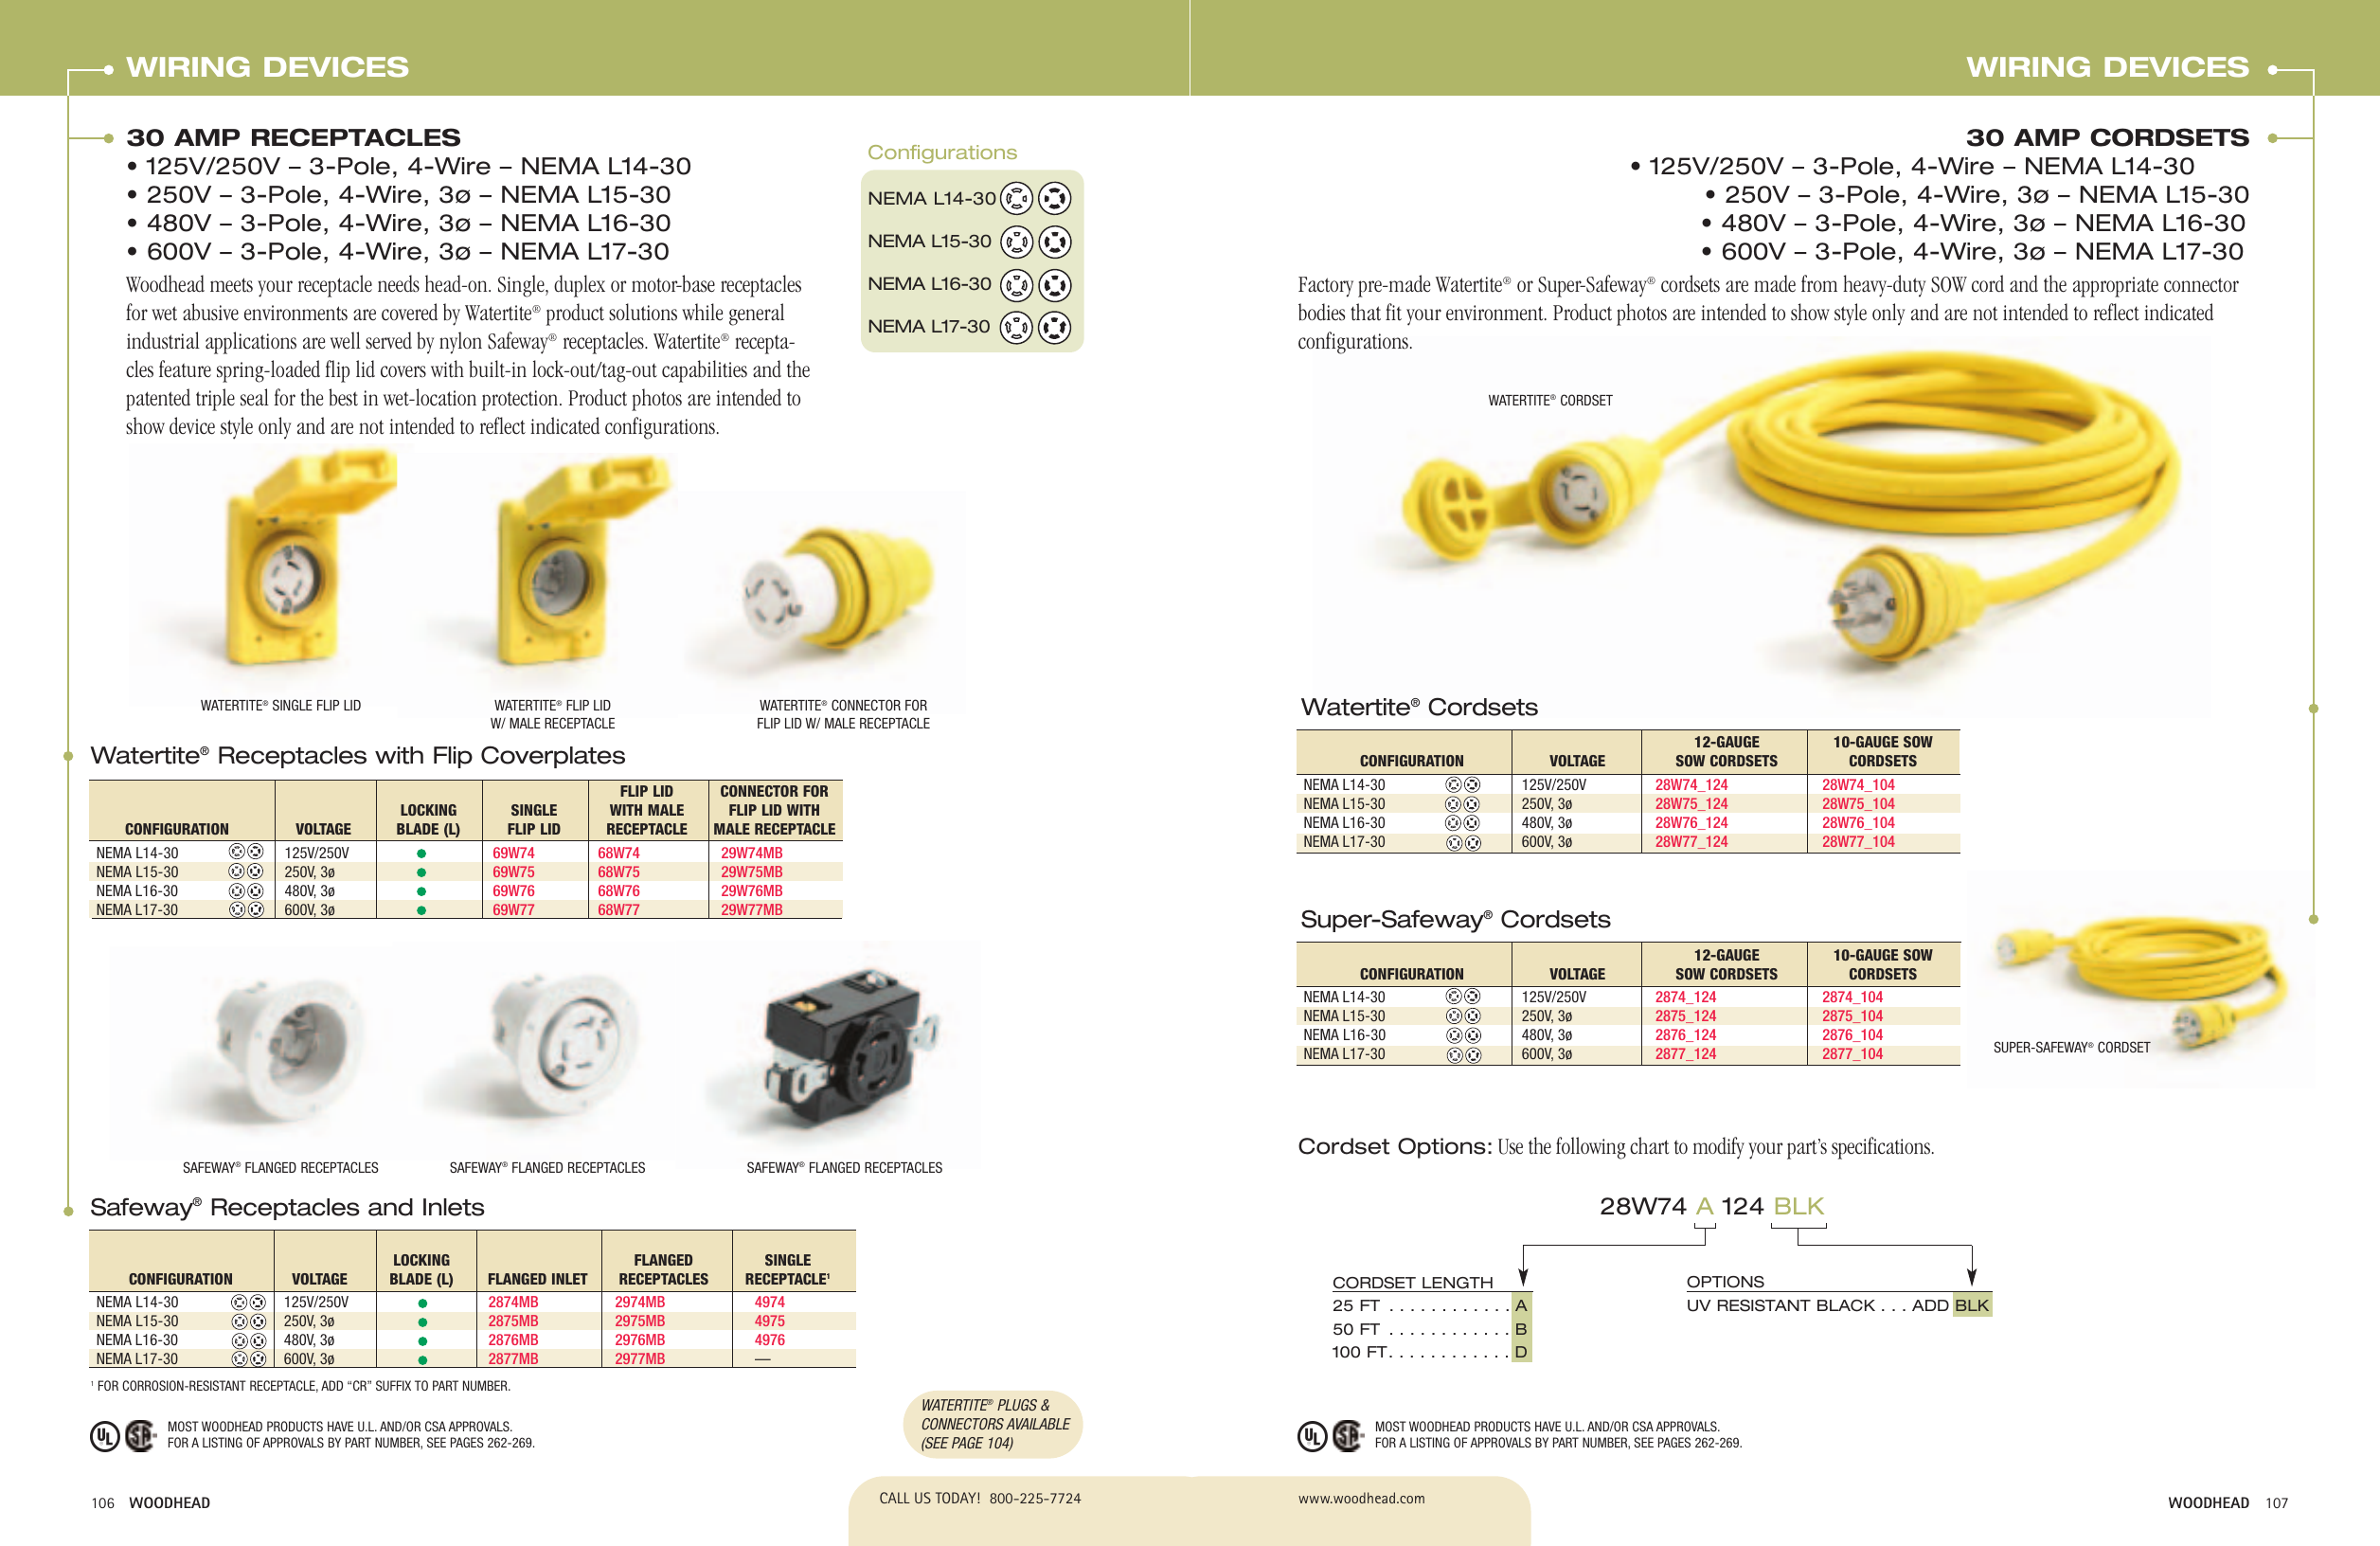 Page 6 of 8 - 046-093_Wiring  Brochure